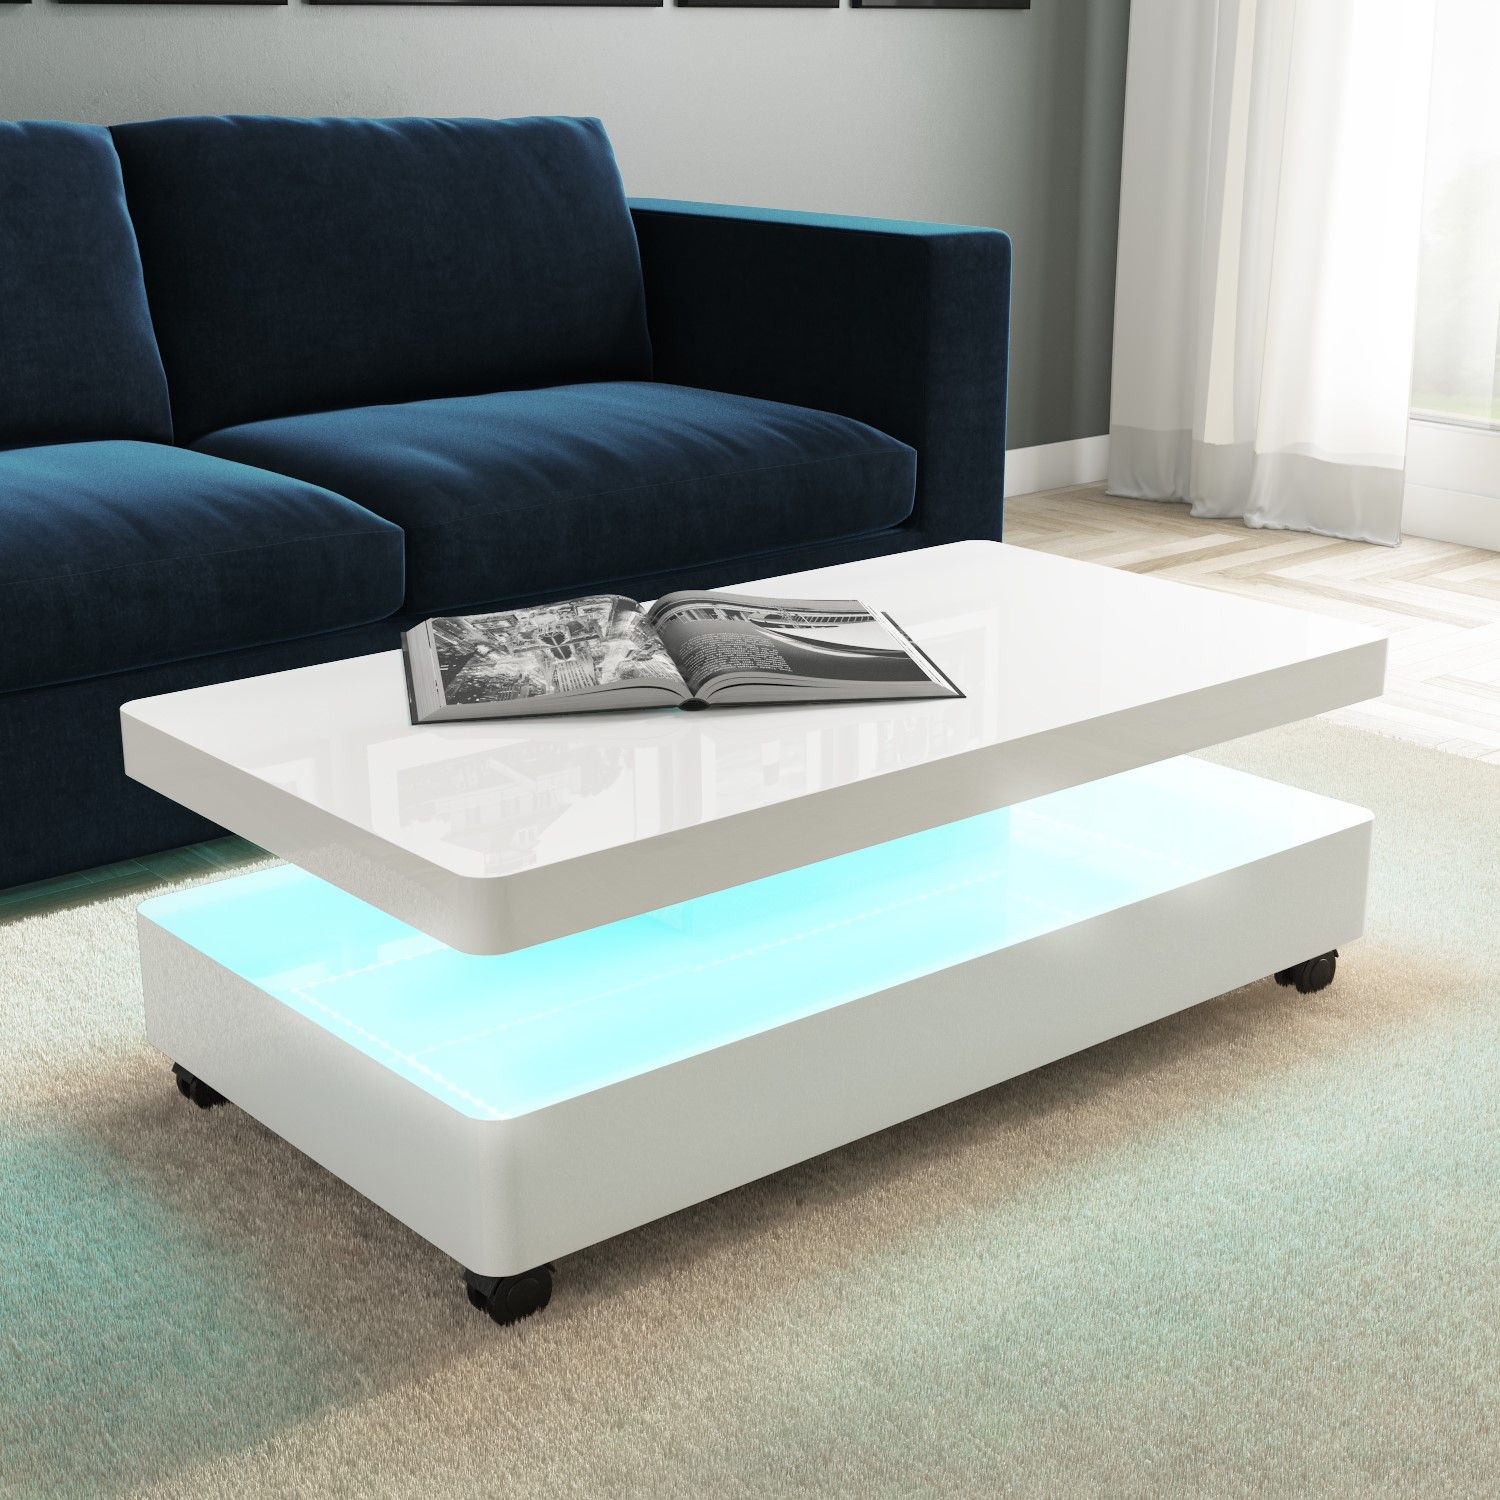 High Gloss White Coffee Table With Led Lighting 5060388562168 | Ebay In Rectangular Led Coffee Tables (Photo 9 of 15)